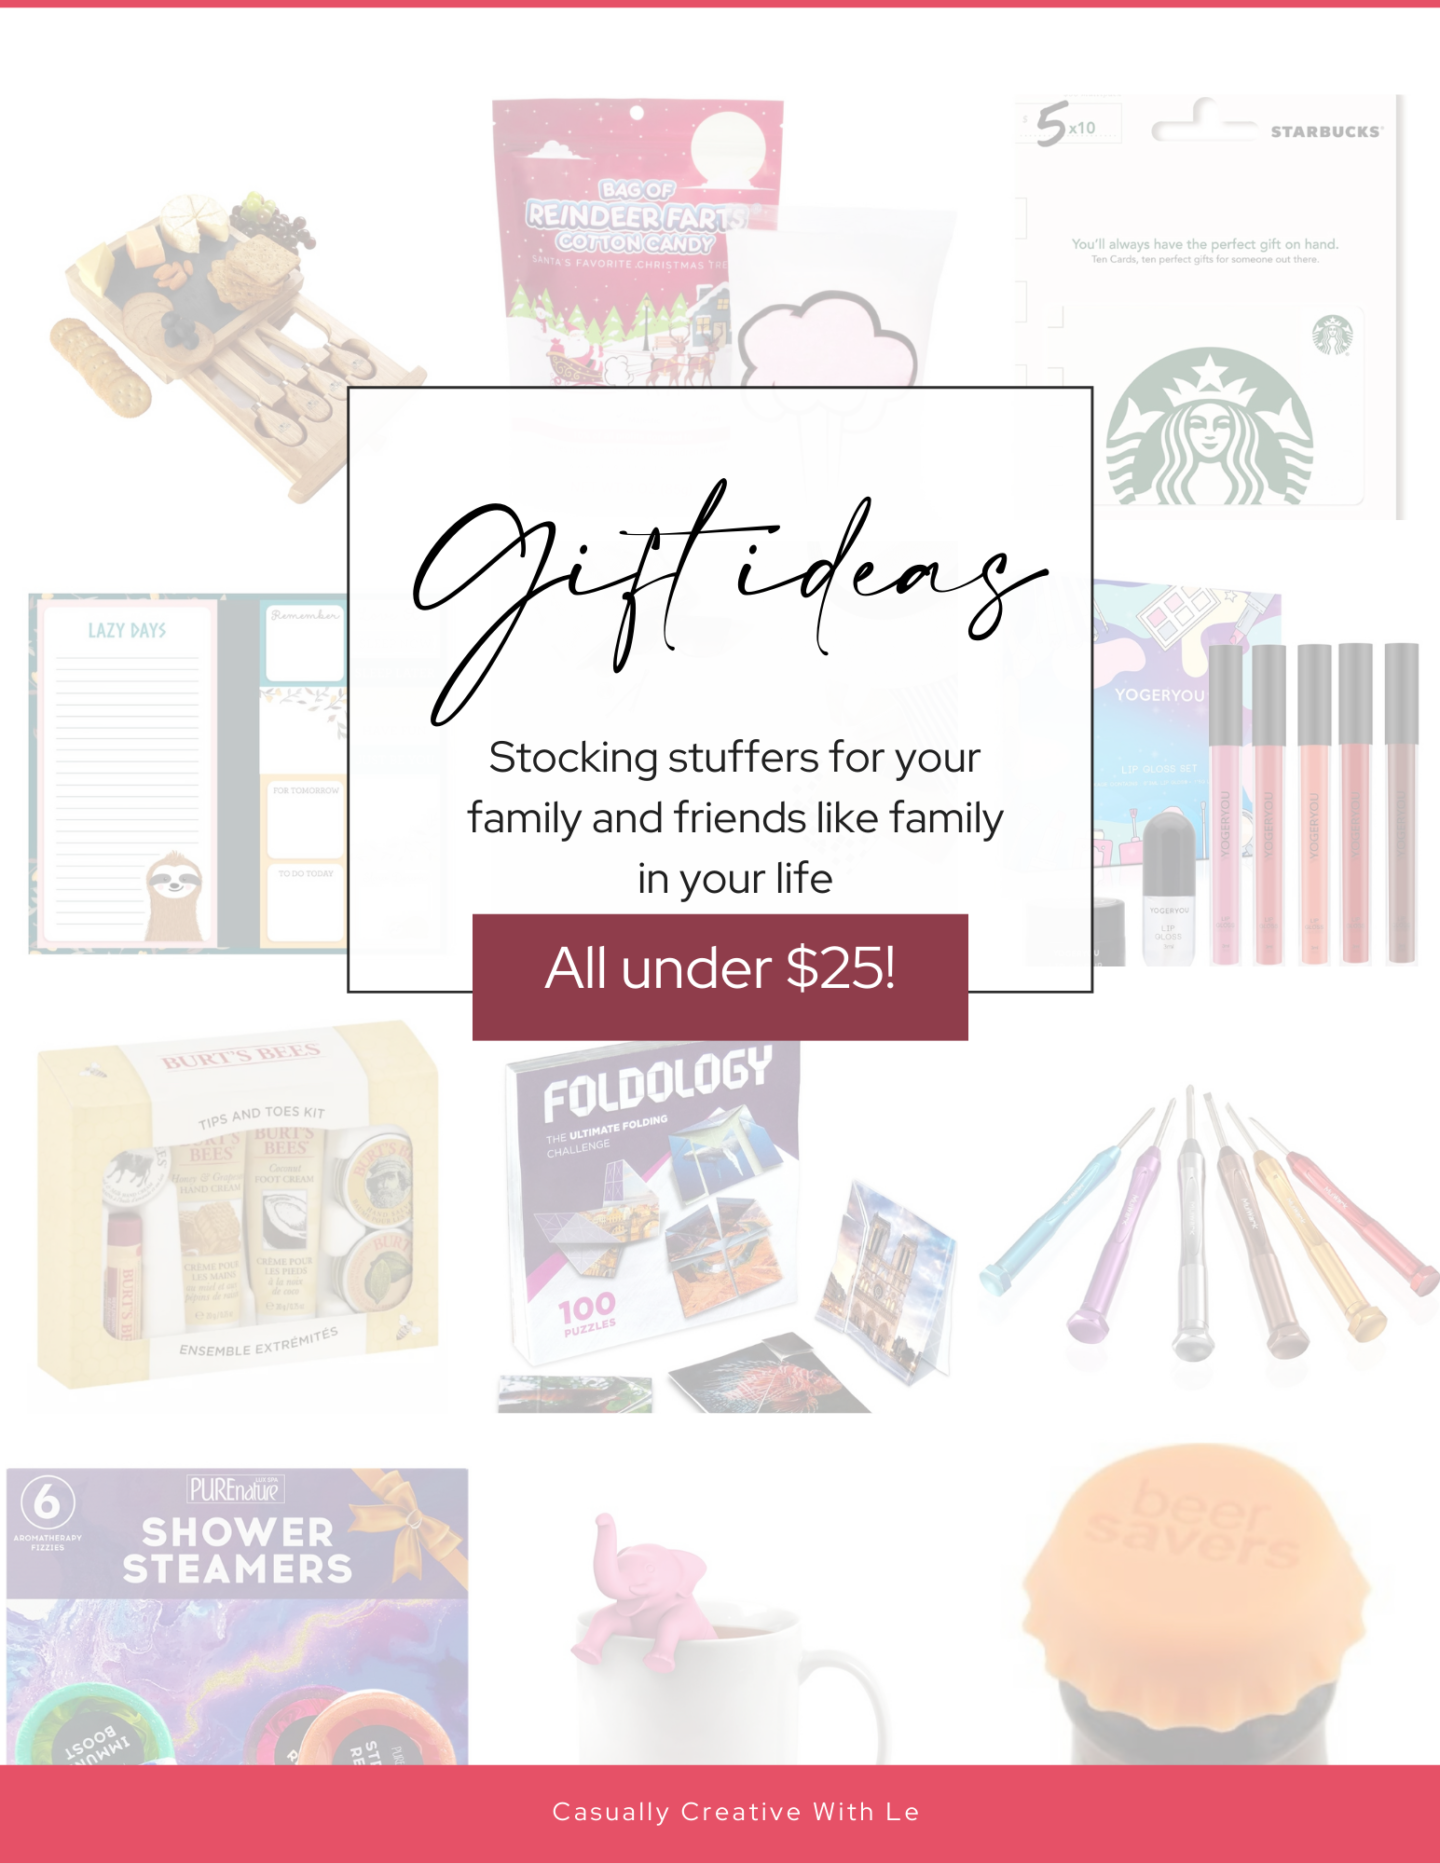 image of stocking stuffer gifts including starbucks gift cards, chargeable hand warmer, lip gloss and other unique gifts under $25.